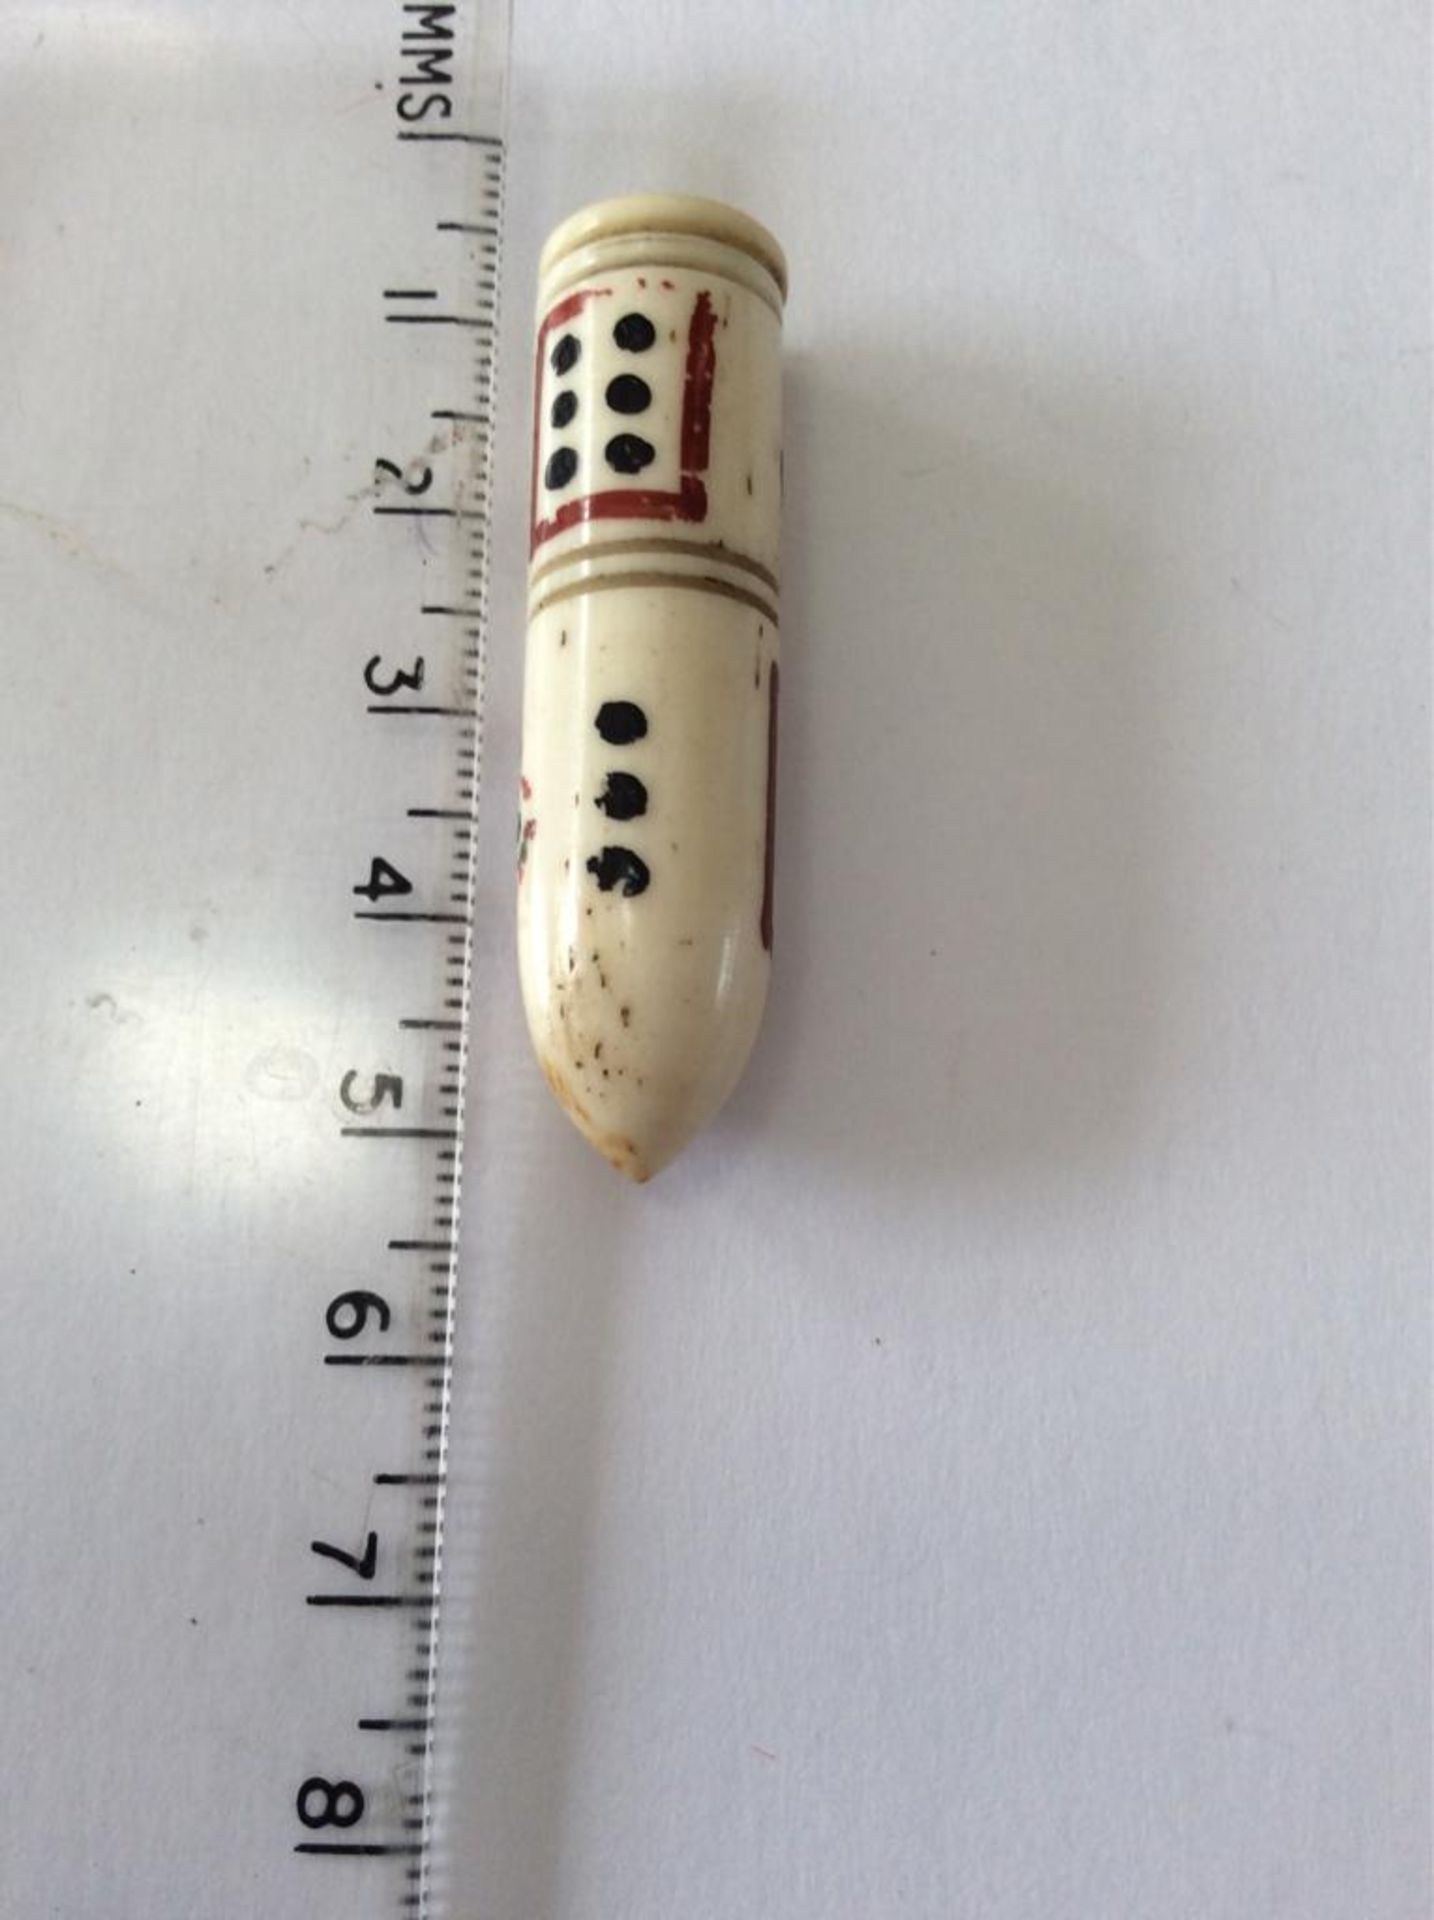 TRENCH ART, CARVED BONE DICE HOLDER - Image 2 of 2